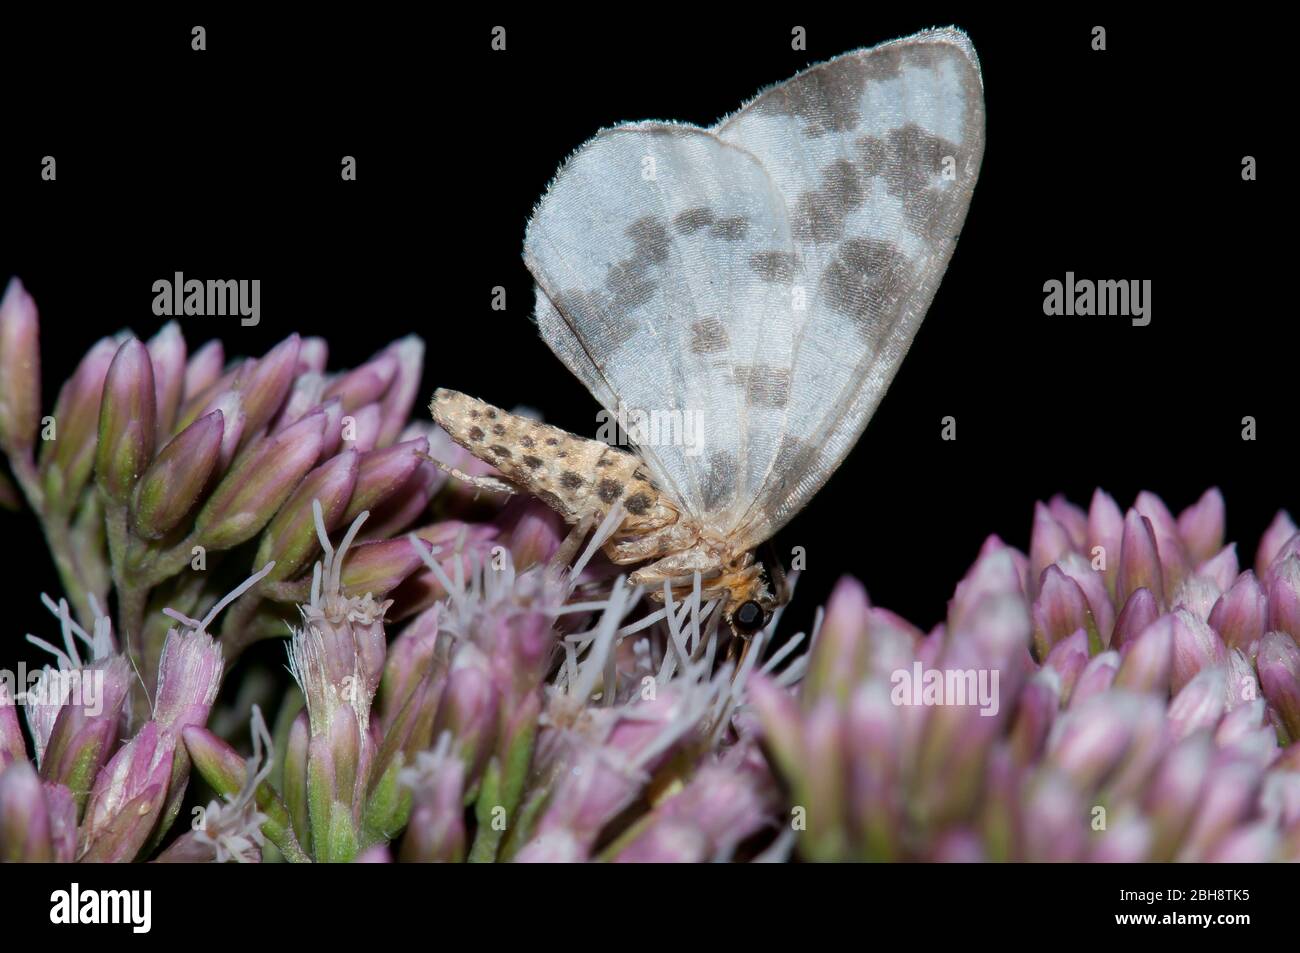 Clouded magpie, Abraxas sylvata, sitting on violet flowers, Bavaria, Germany Stock Photo